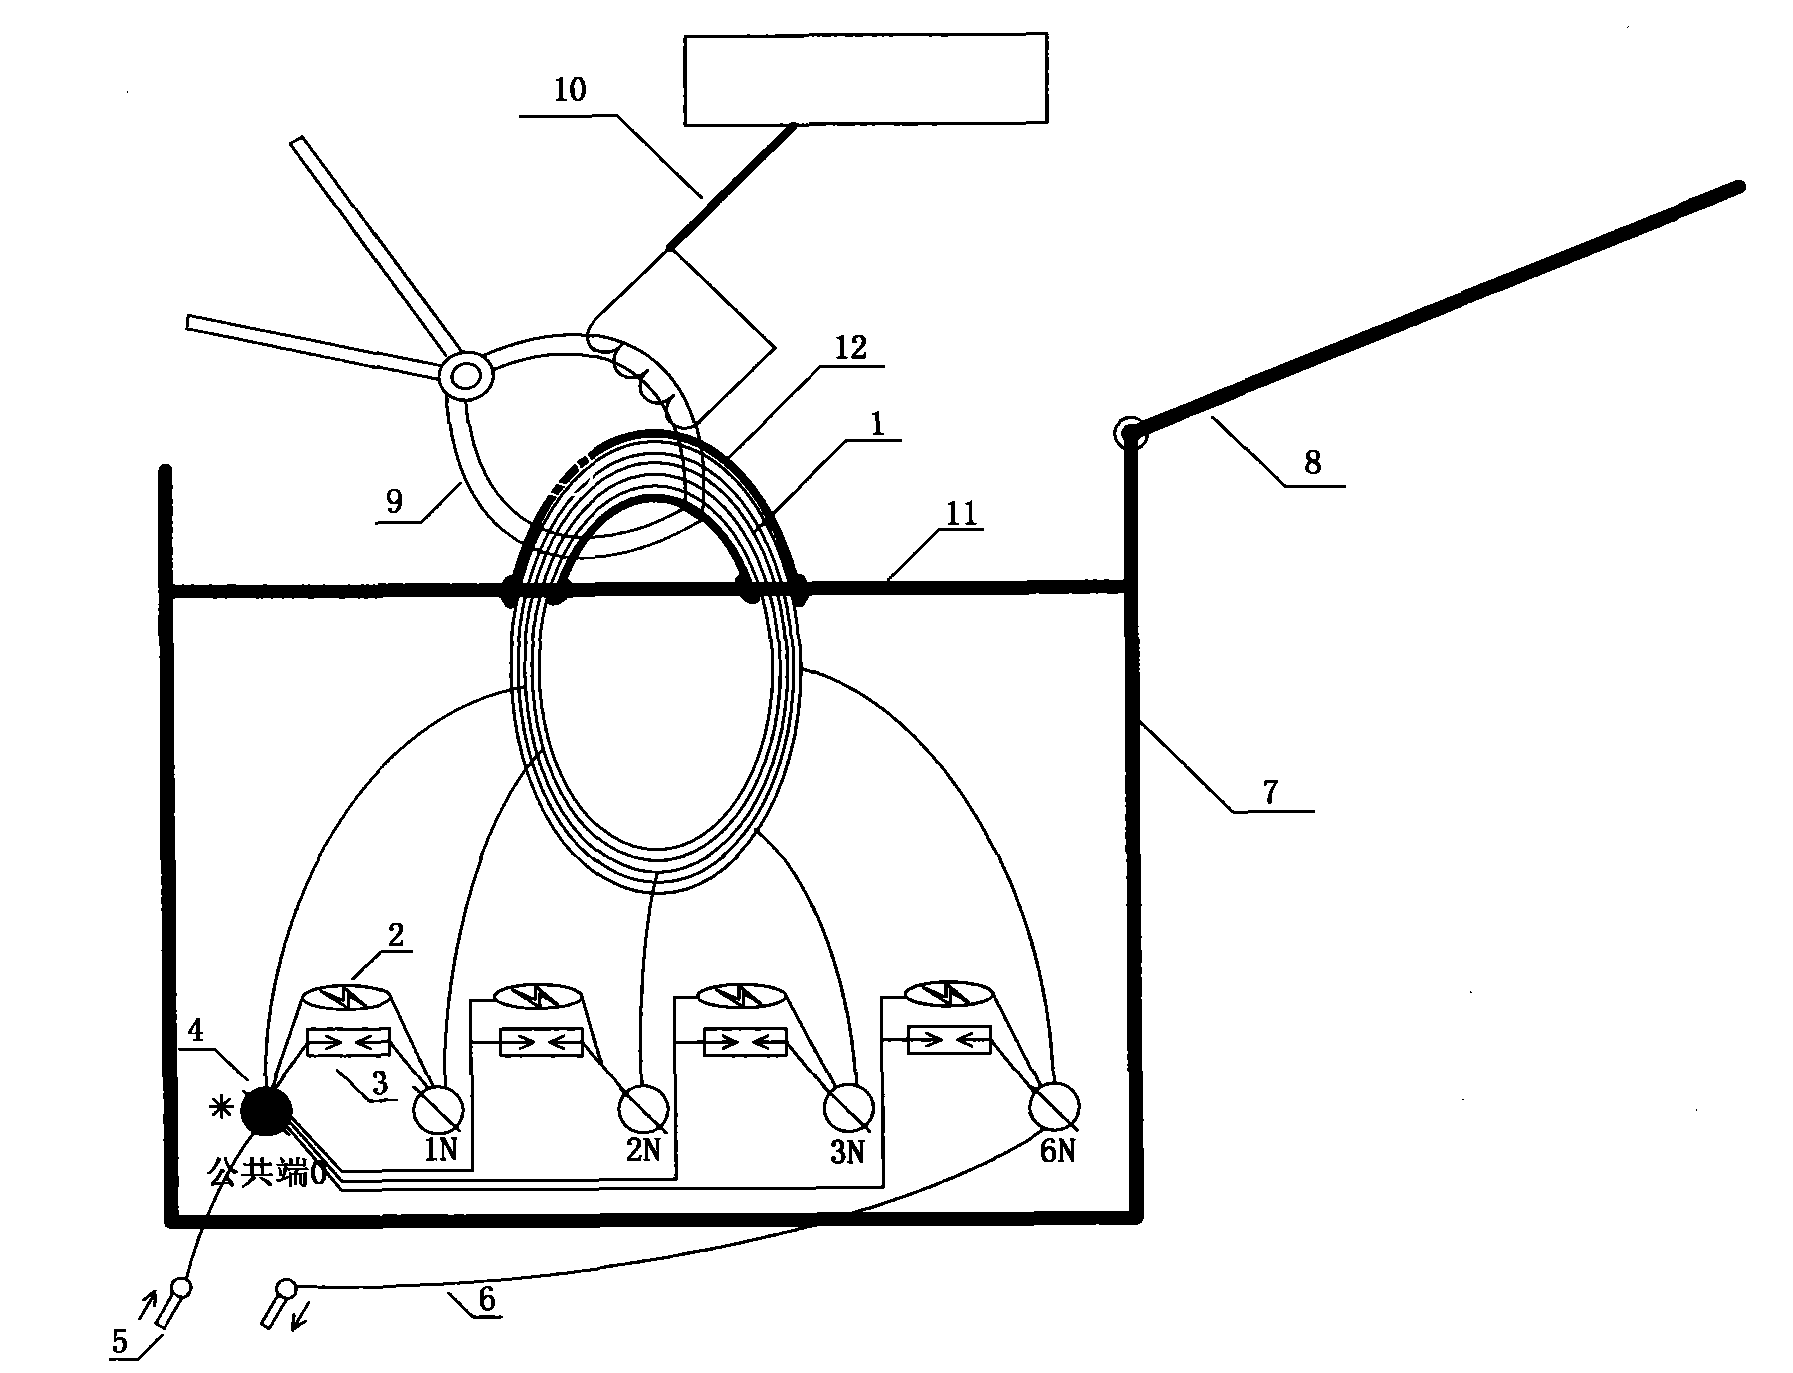 Acquiring and amplifying device of passive AC micro-current